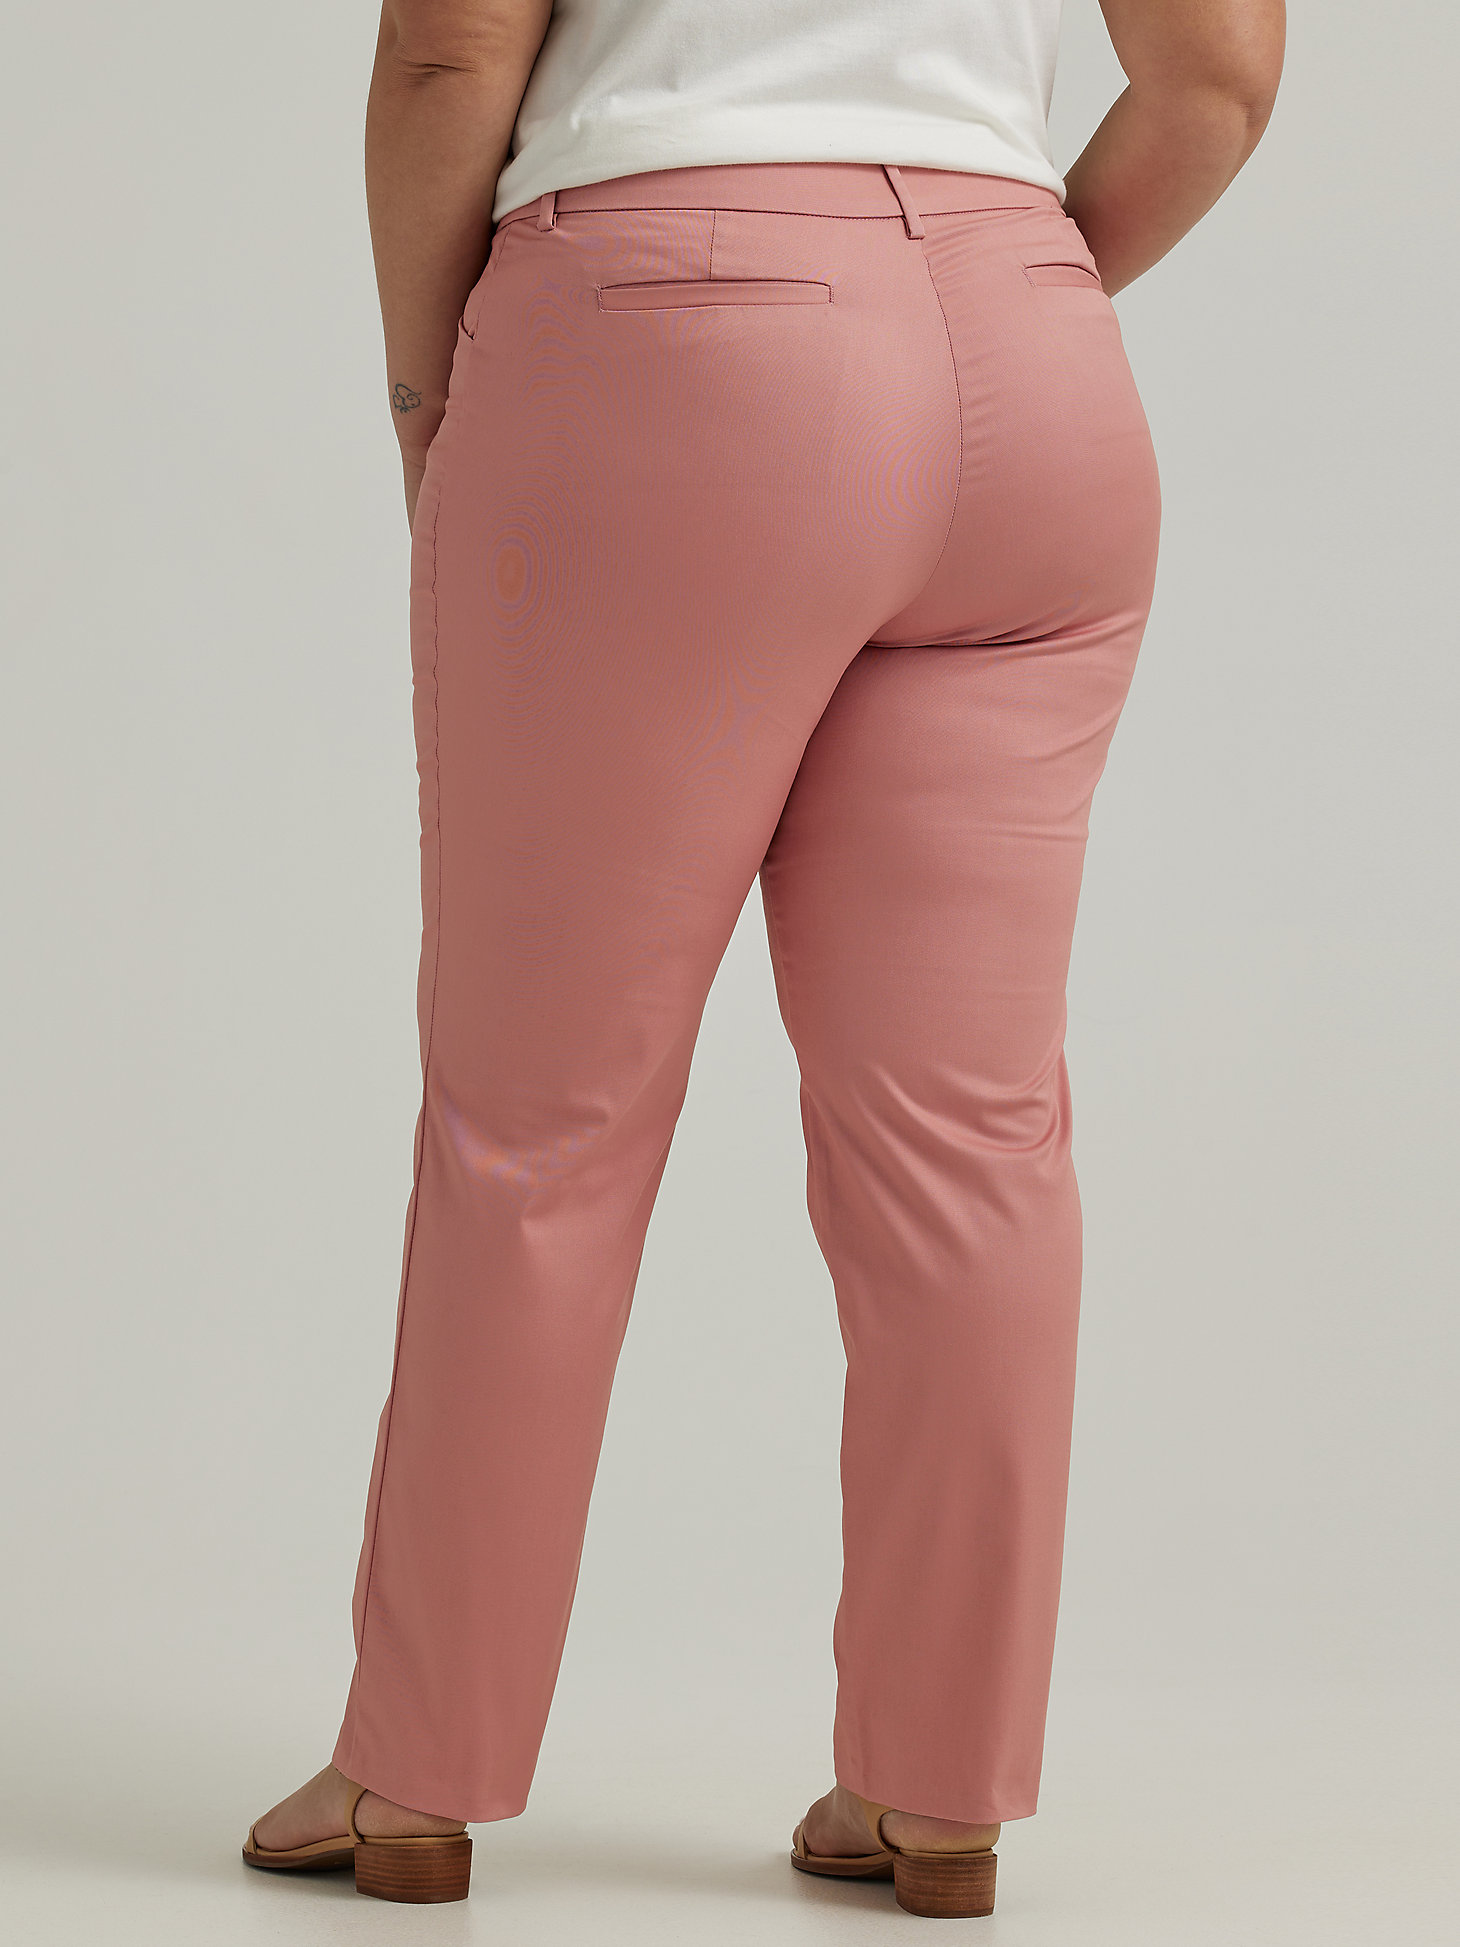 Women's Wrinkle Free Relaxed Fit Straight Leg Pant (Plus) in Mallory Pink alternative view 1